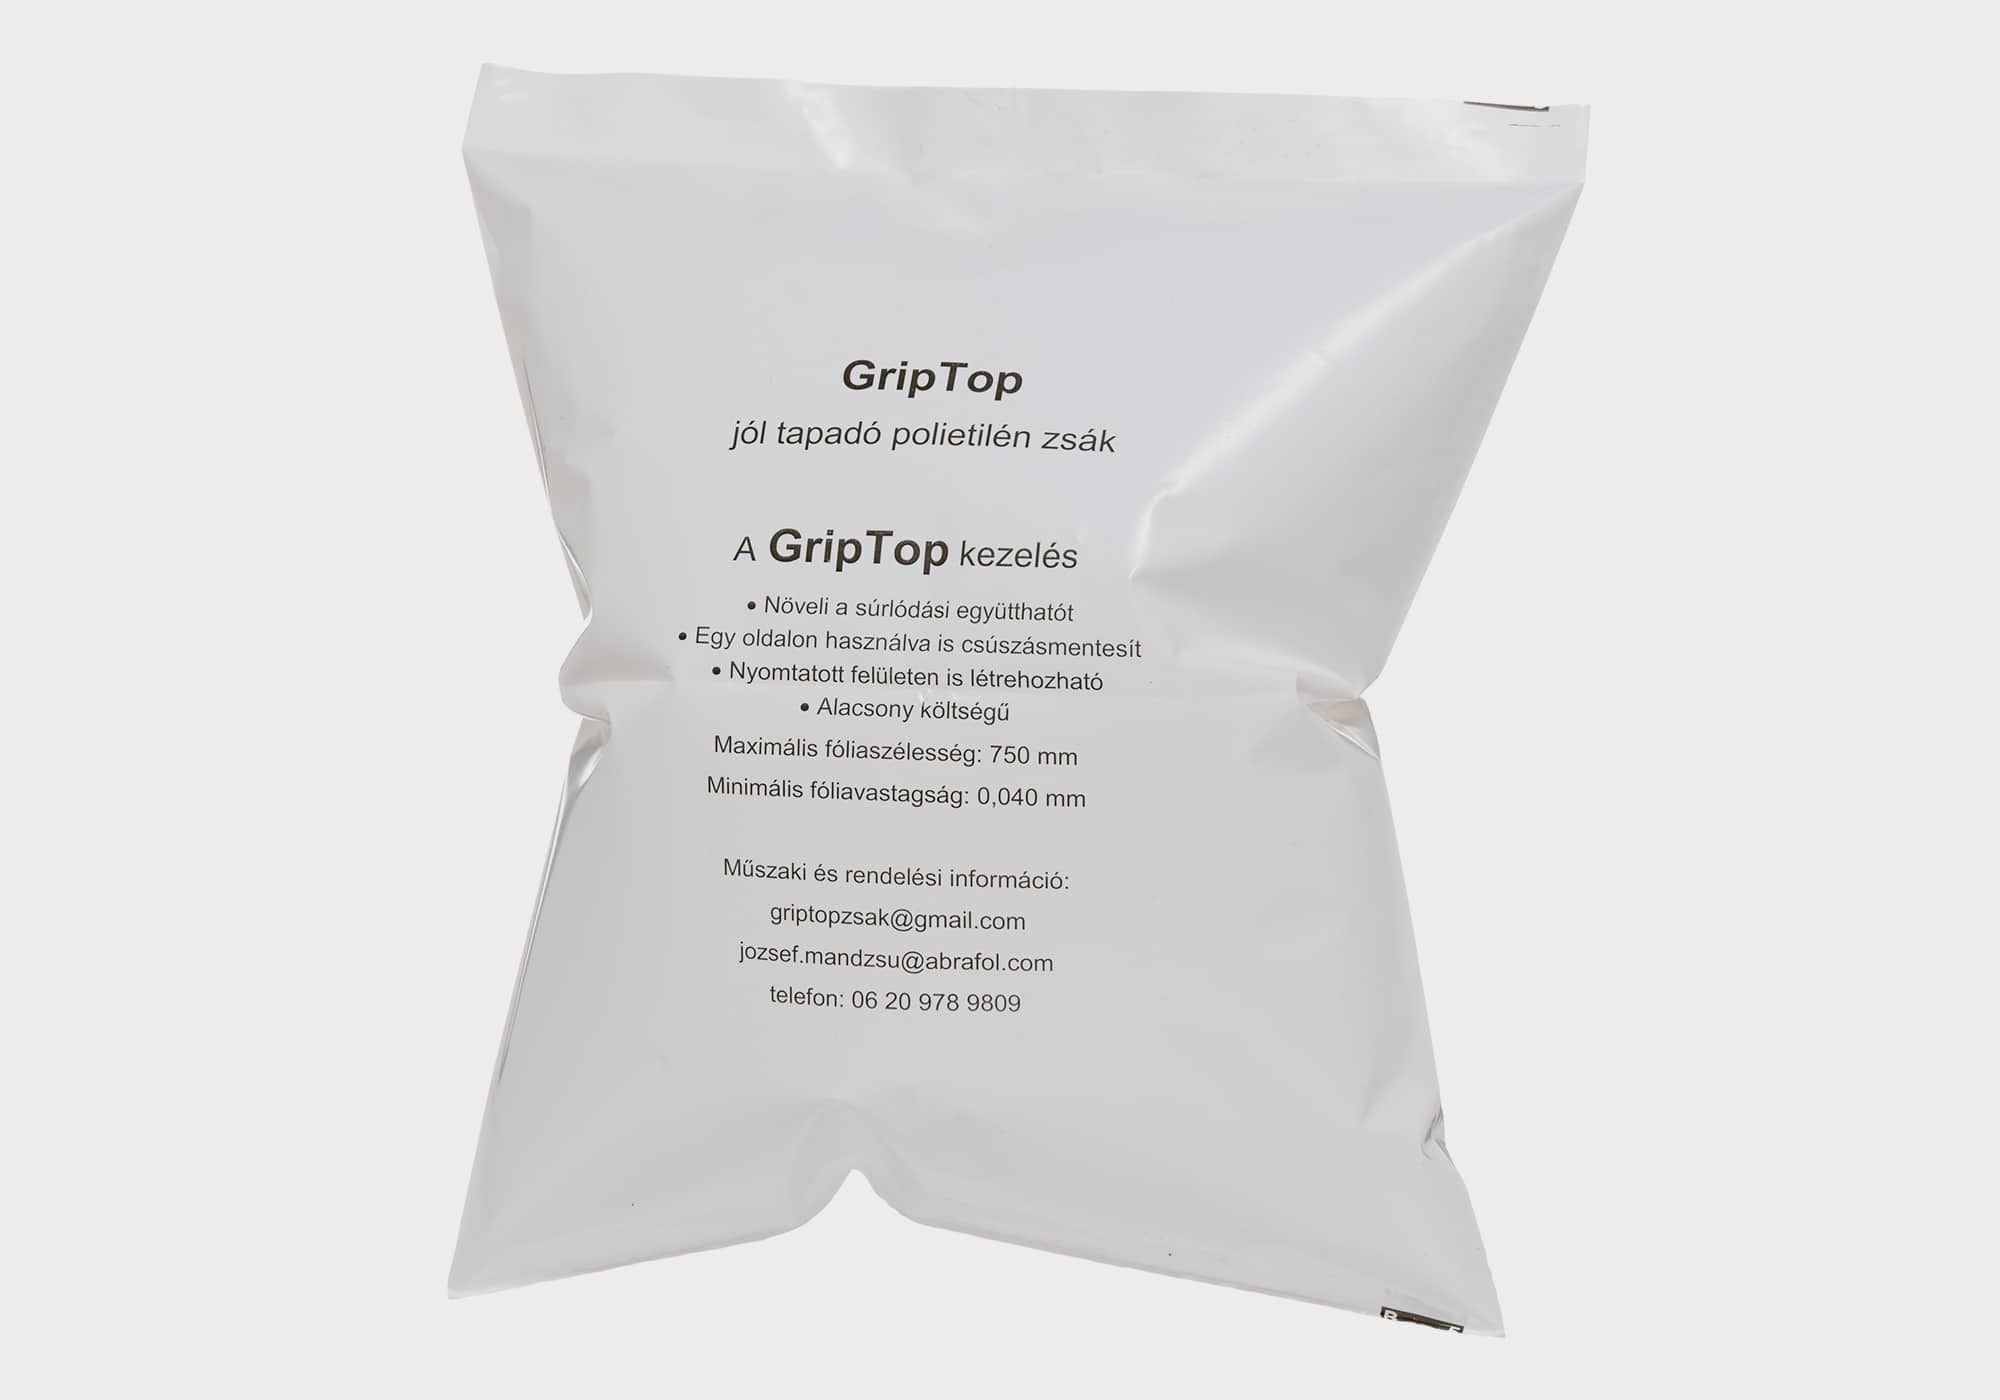 GripTop anti-slip bag BY Flexinnova kft in collaboration with Foltrade kft